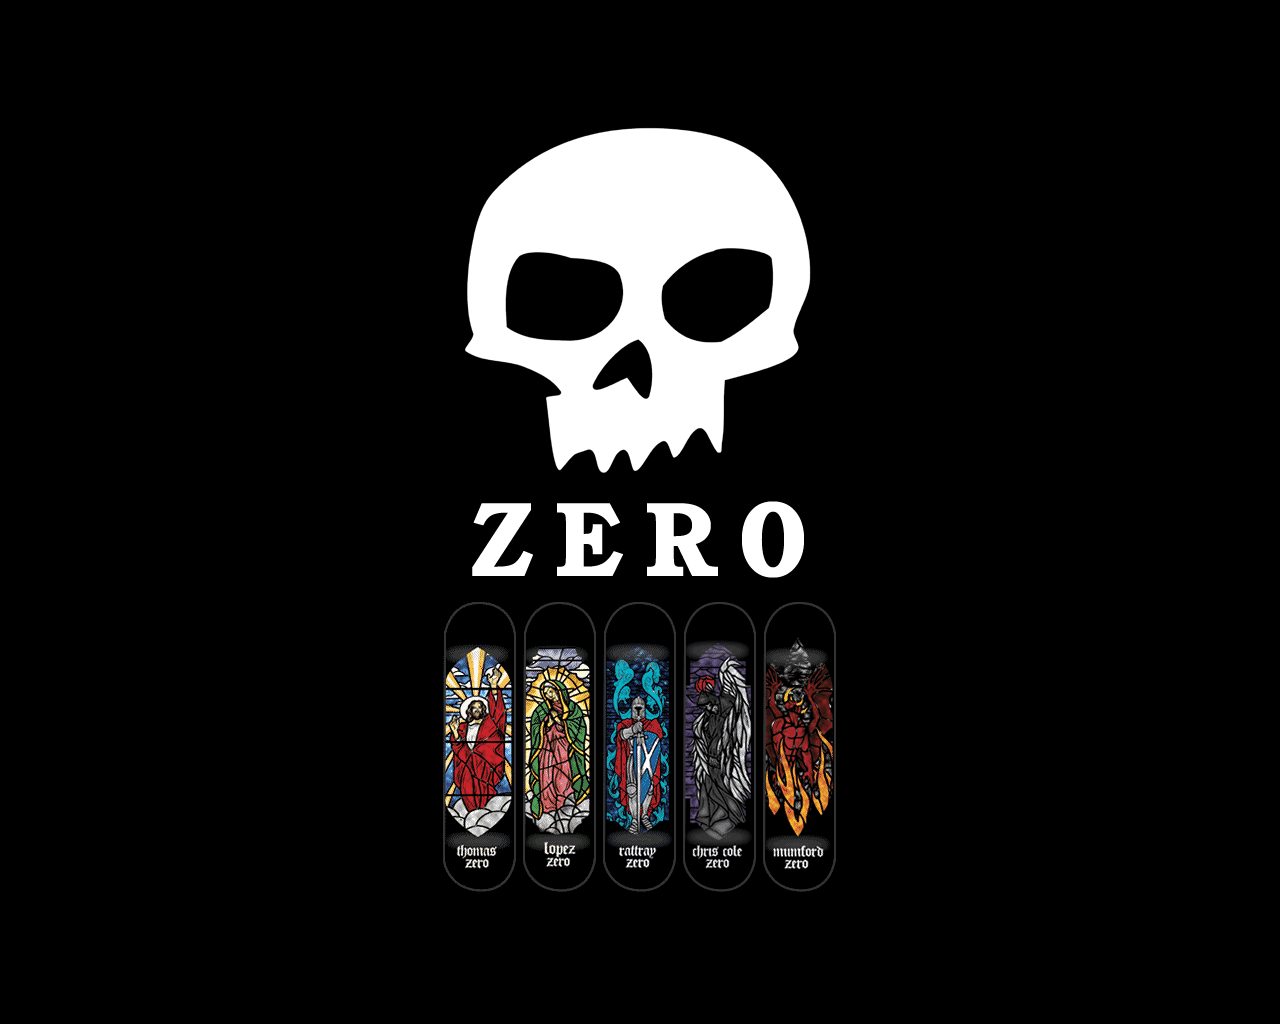 This is one of those wallpapers, and I have all of the skateboards depicted 